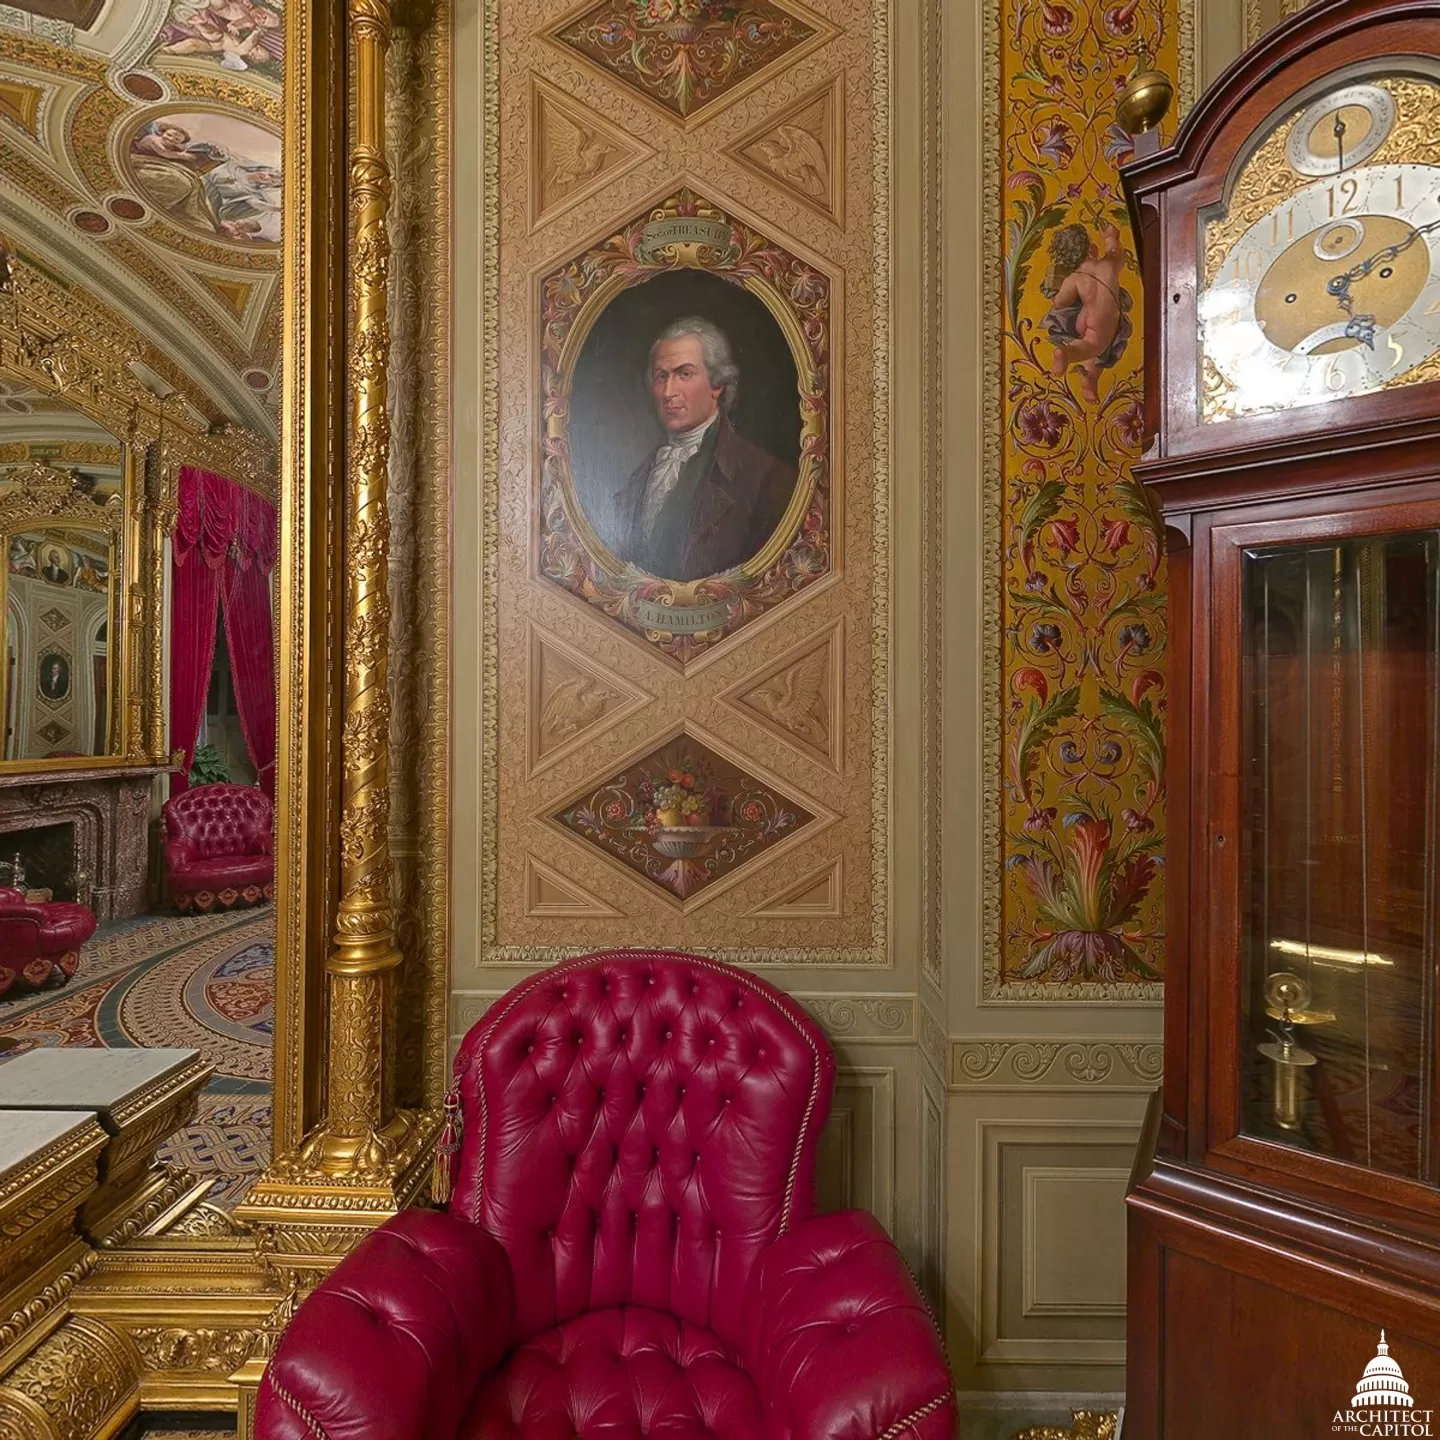 A room with a portrait, chair and clock.